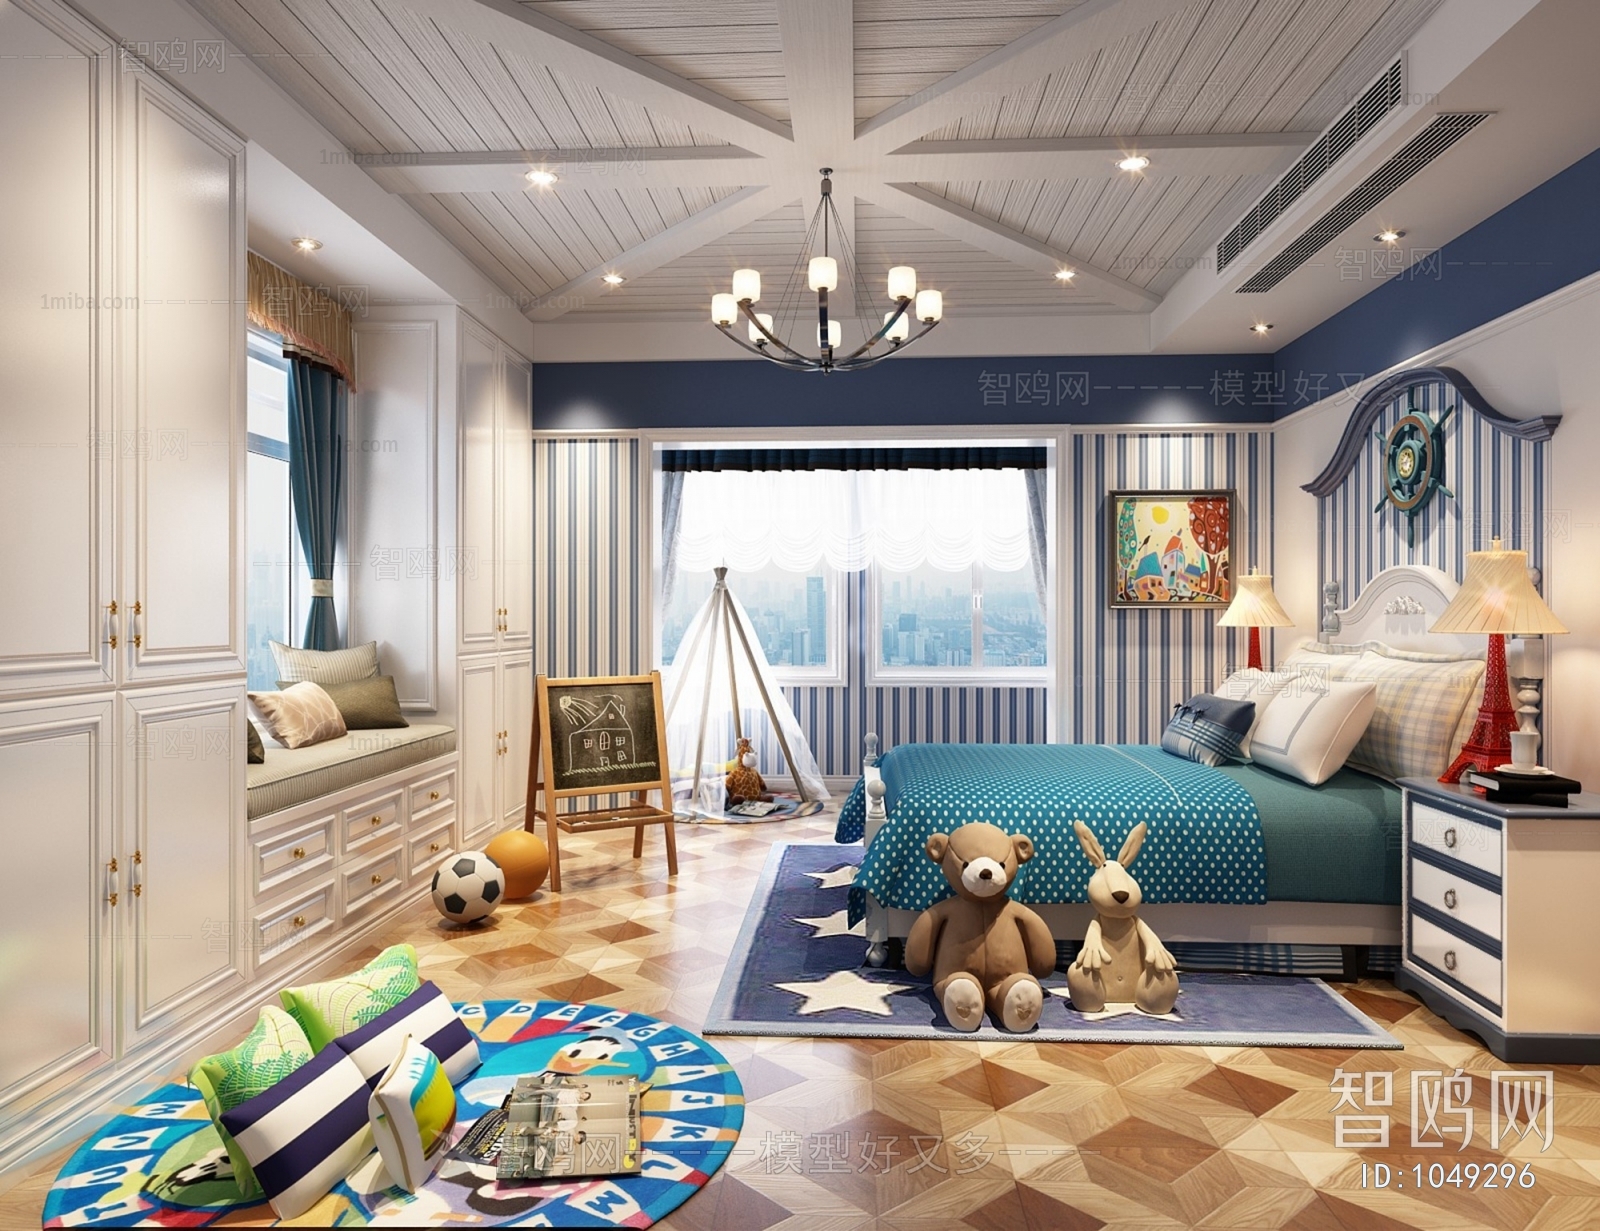 Mediterranean Style Boy's Room And Son's Room